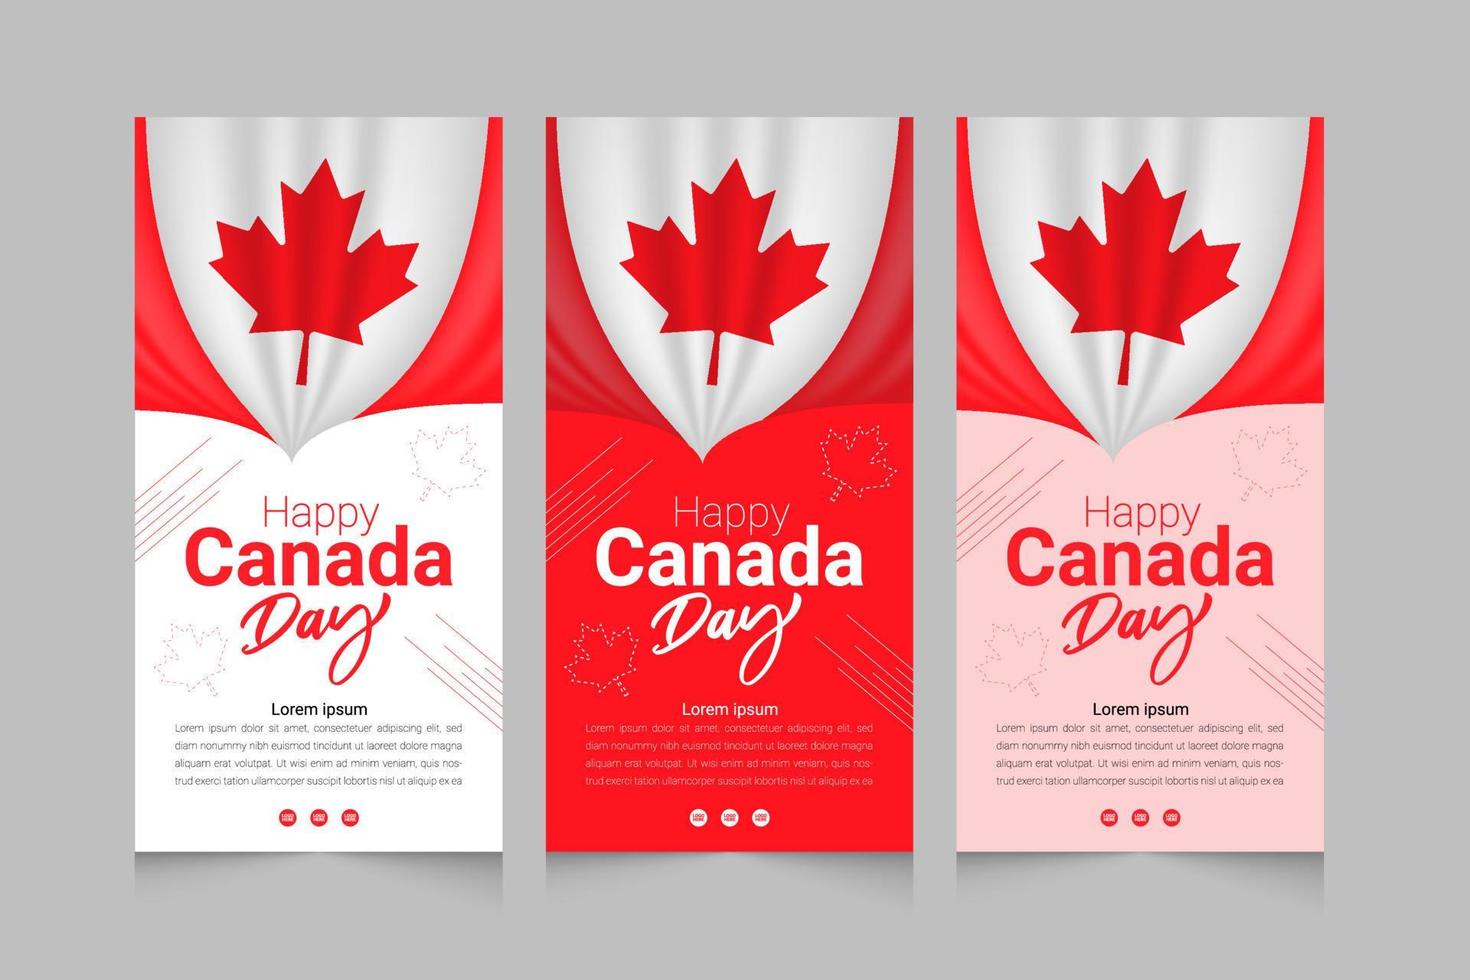 Happy Canada Day with Canada flag vertical banner set design vector